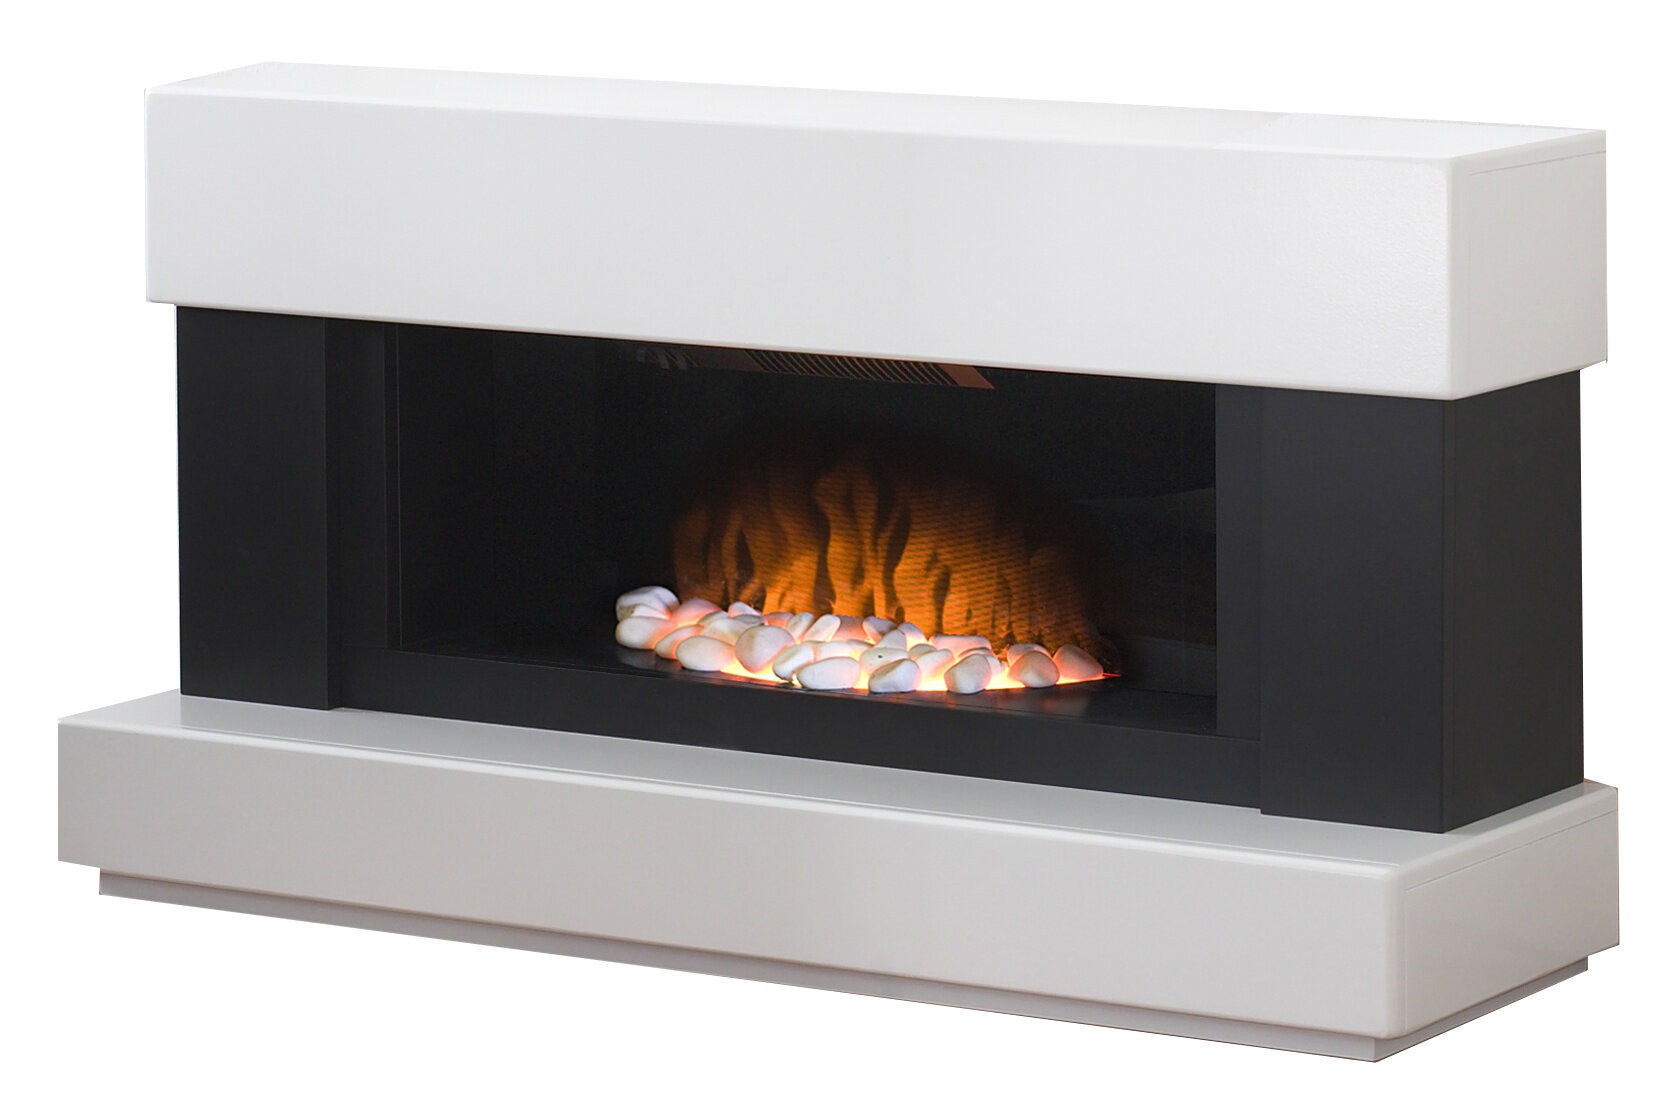 Ndent flame effect is ideal for placing beneath a wall